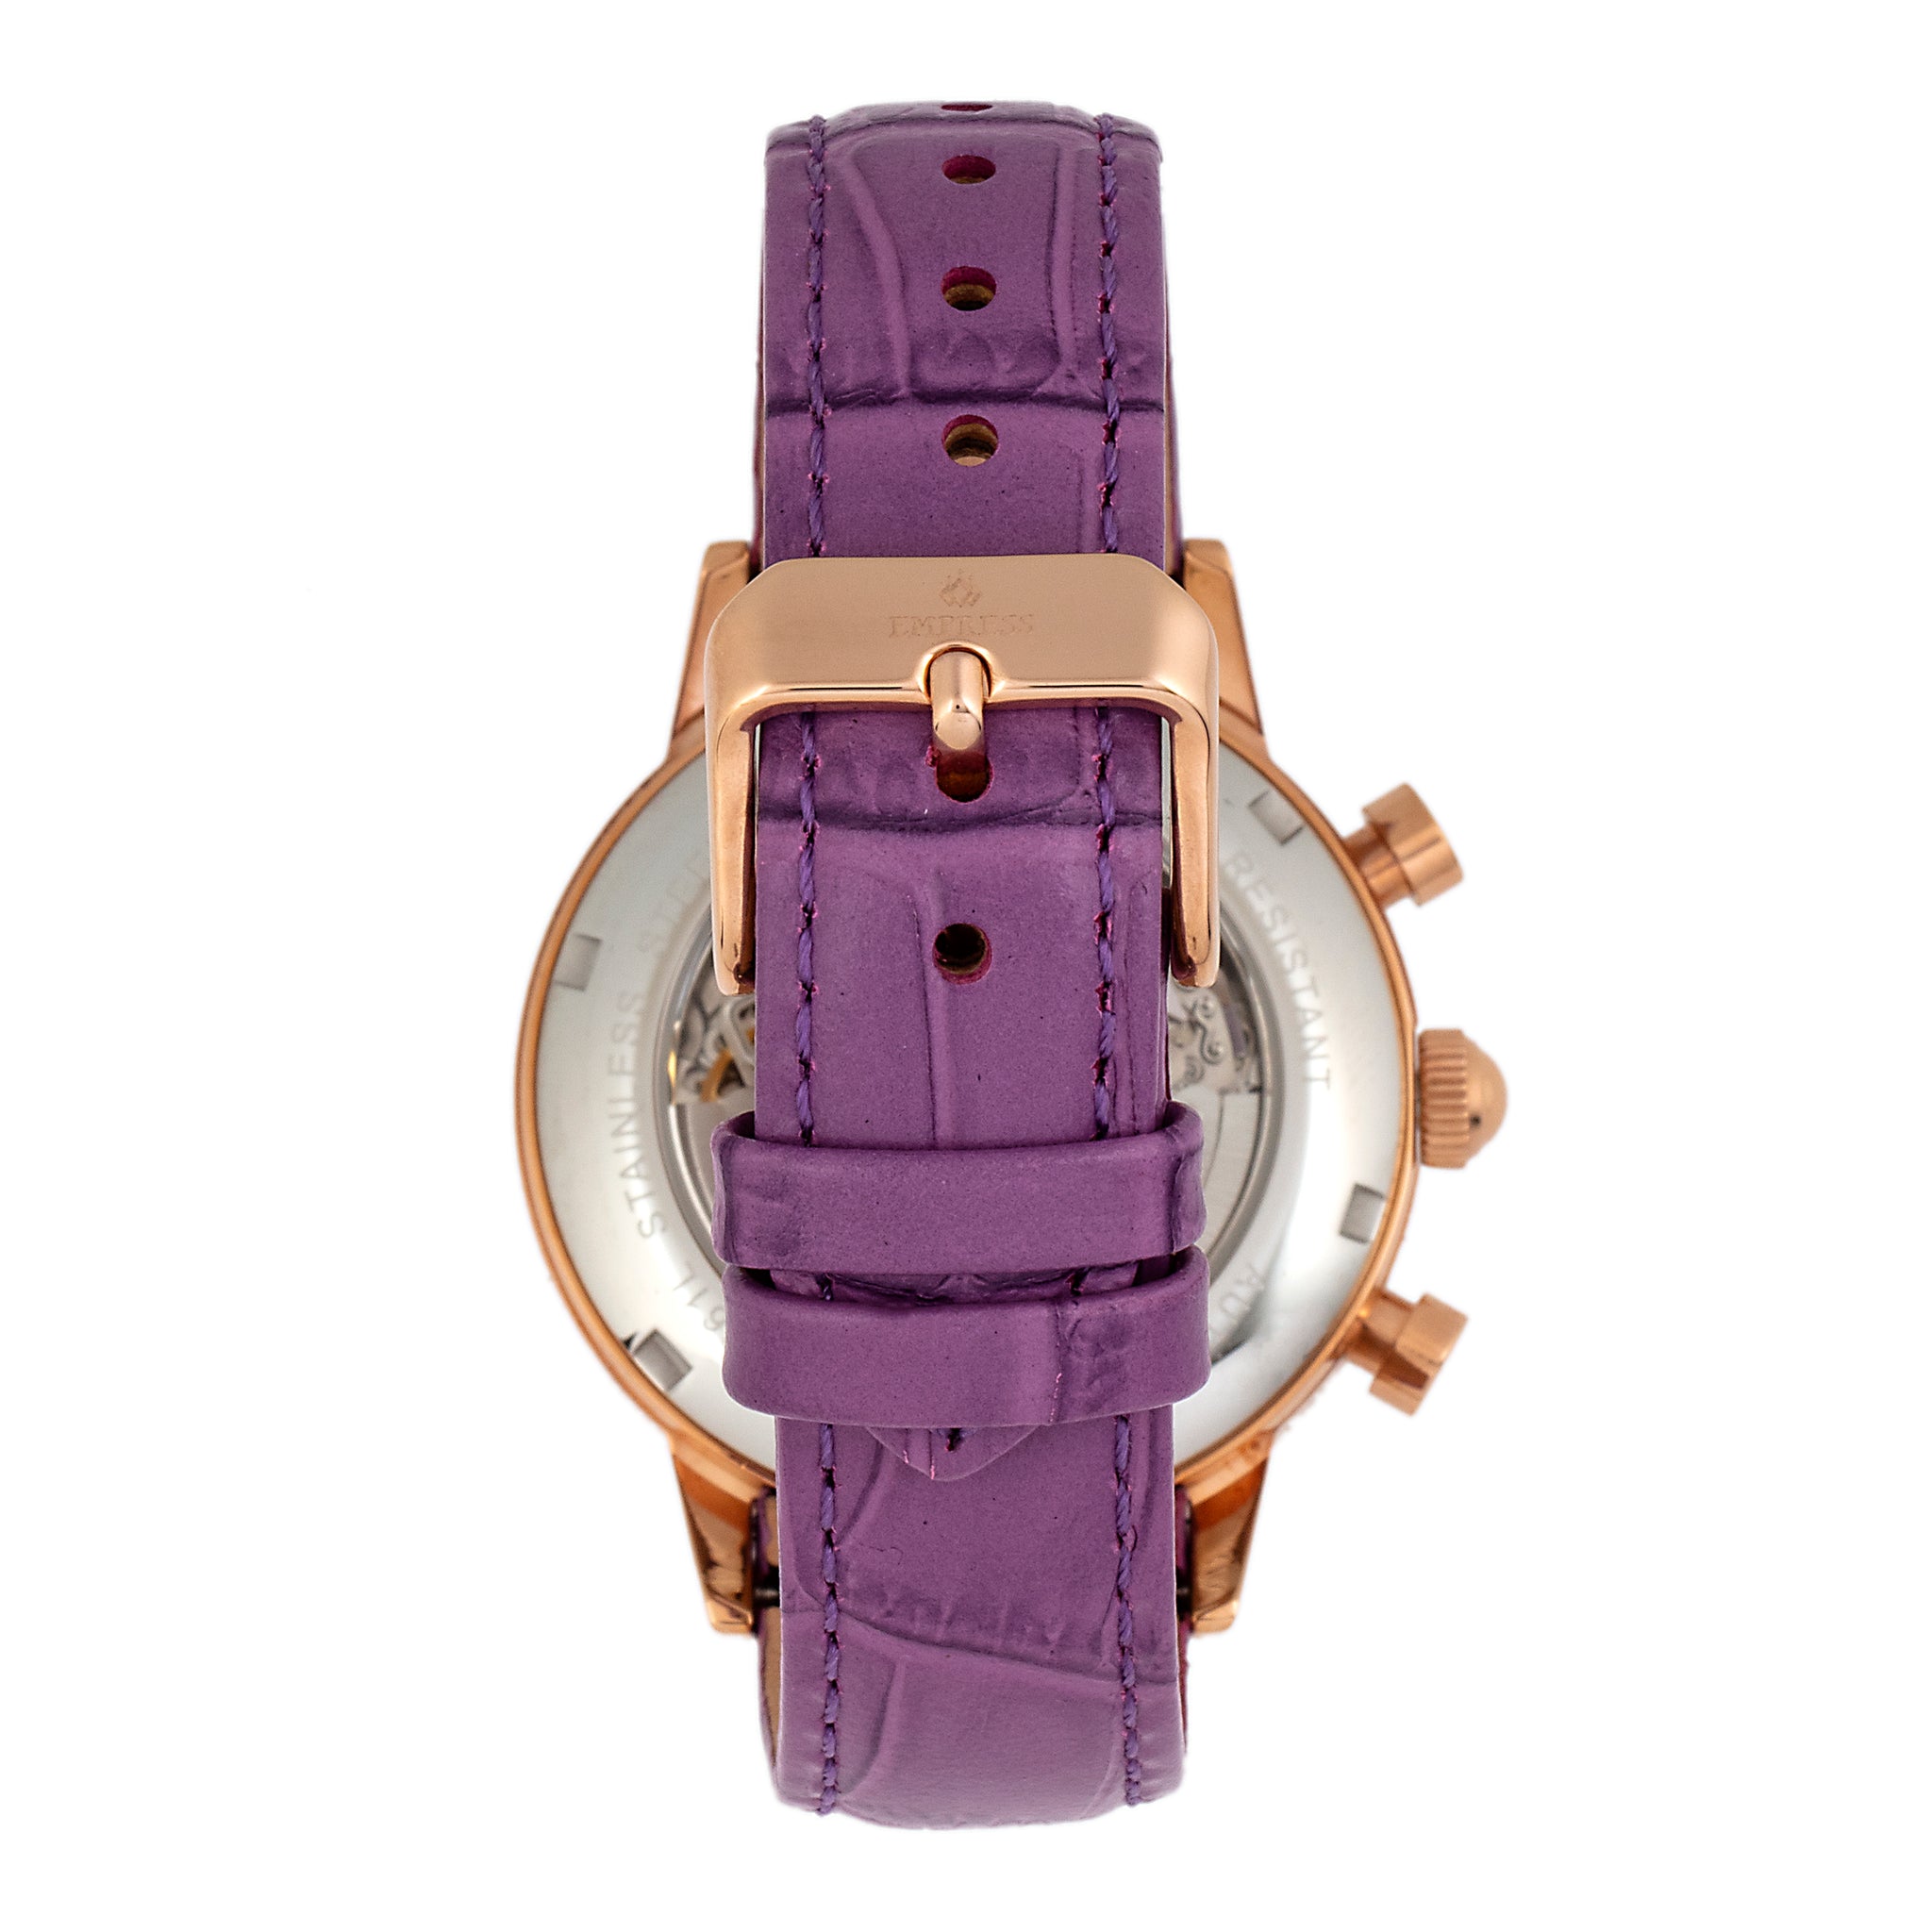 Empress Beatrice Automatic Skeleton Dial Leather-Band Watch w/Day/Date - Rose Gold/Purple - EMPEM2006